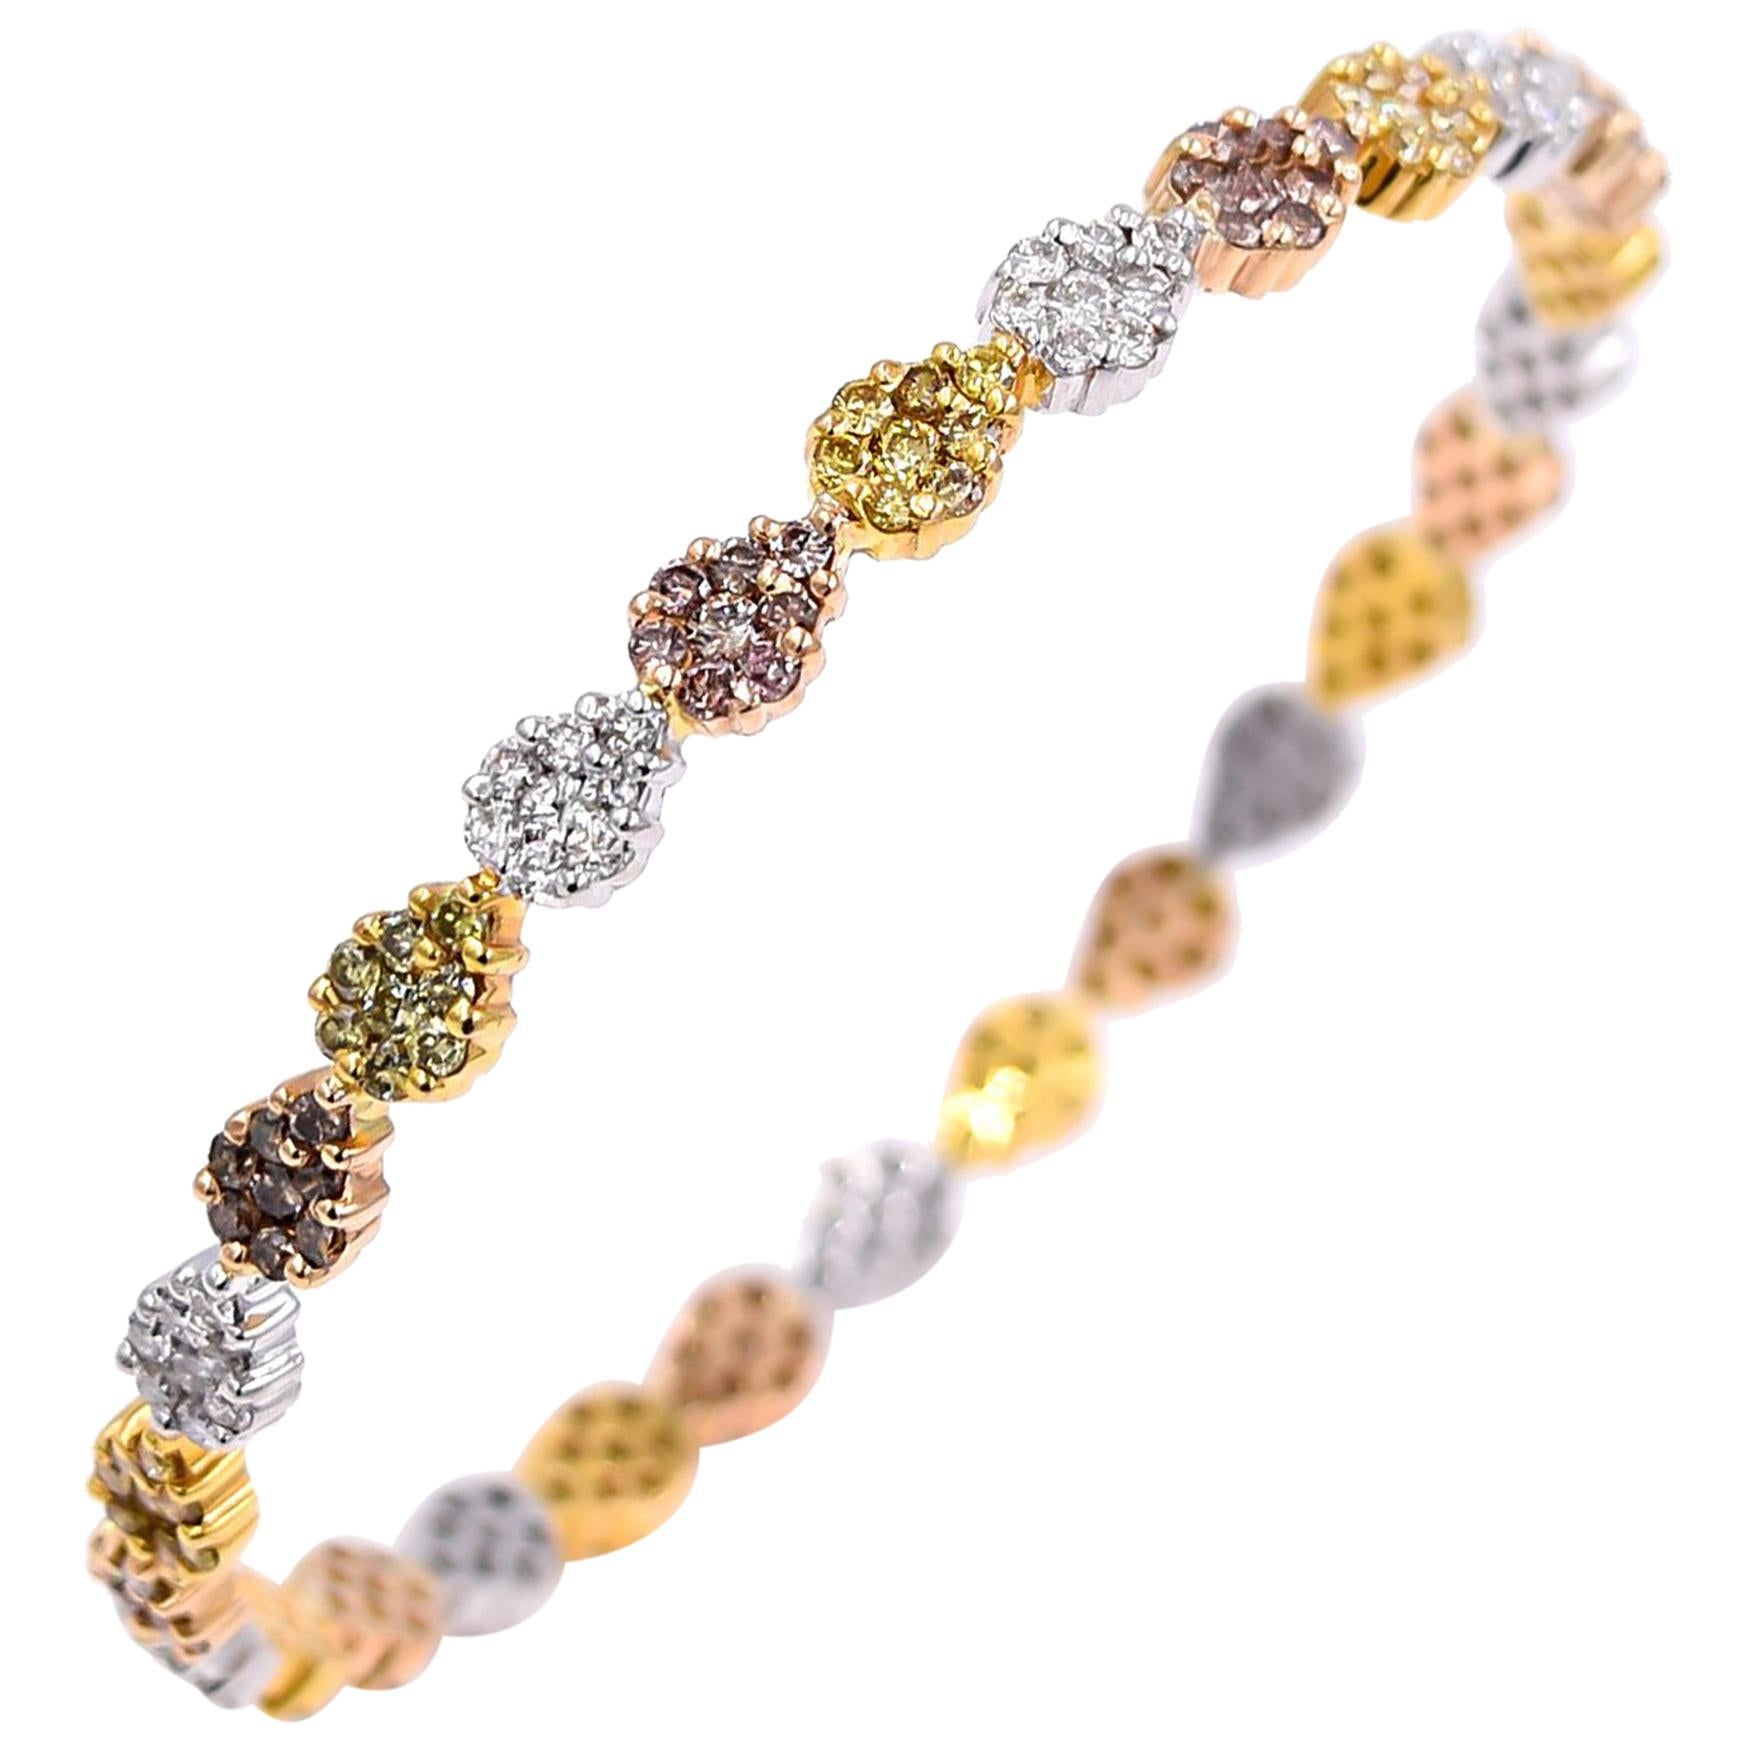 Vivaan 5.89 Carat Multicolored Diamond Bangle in 18K Rose White and Yellow Gold For Sale